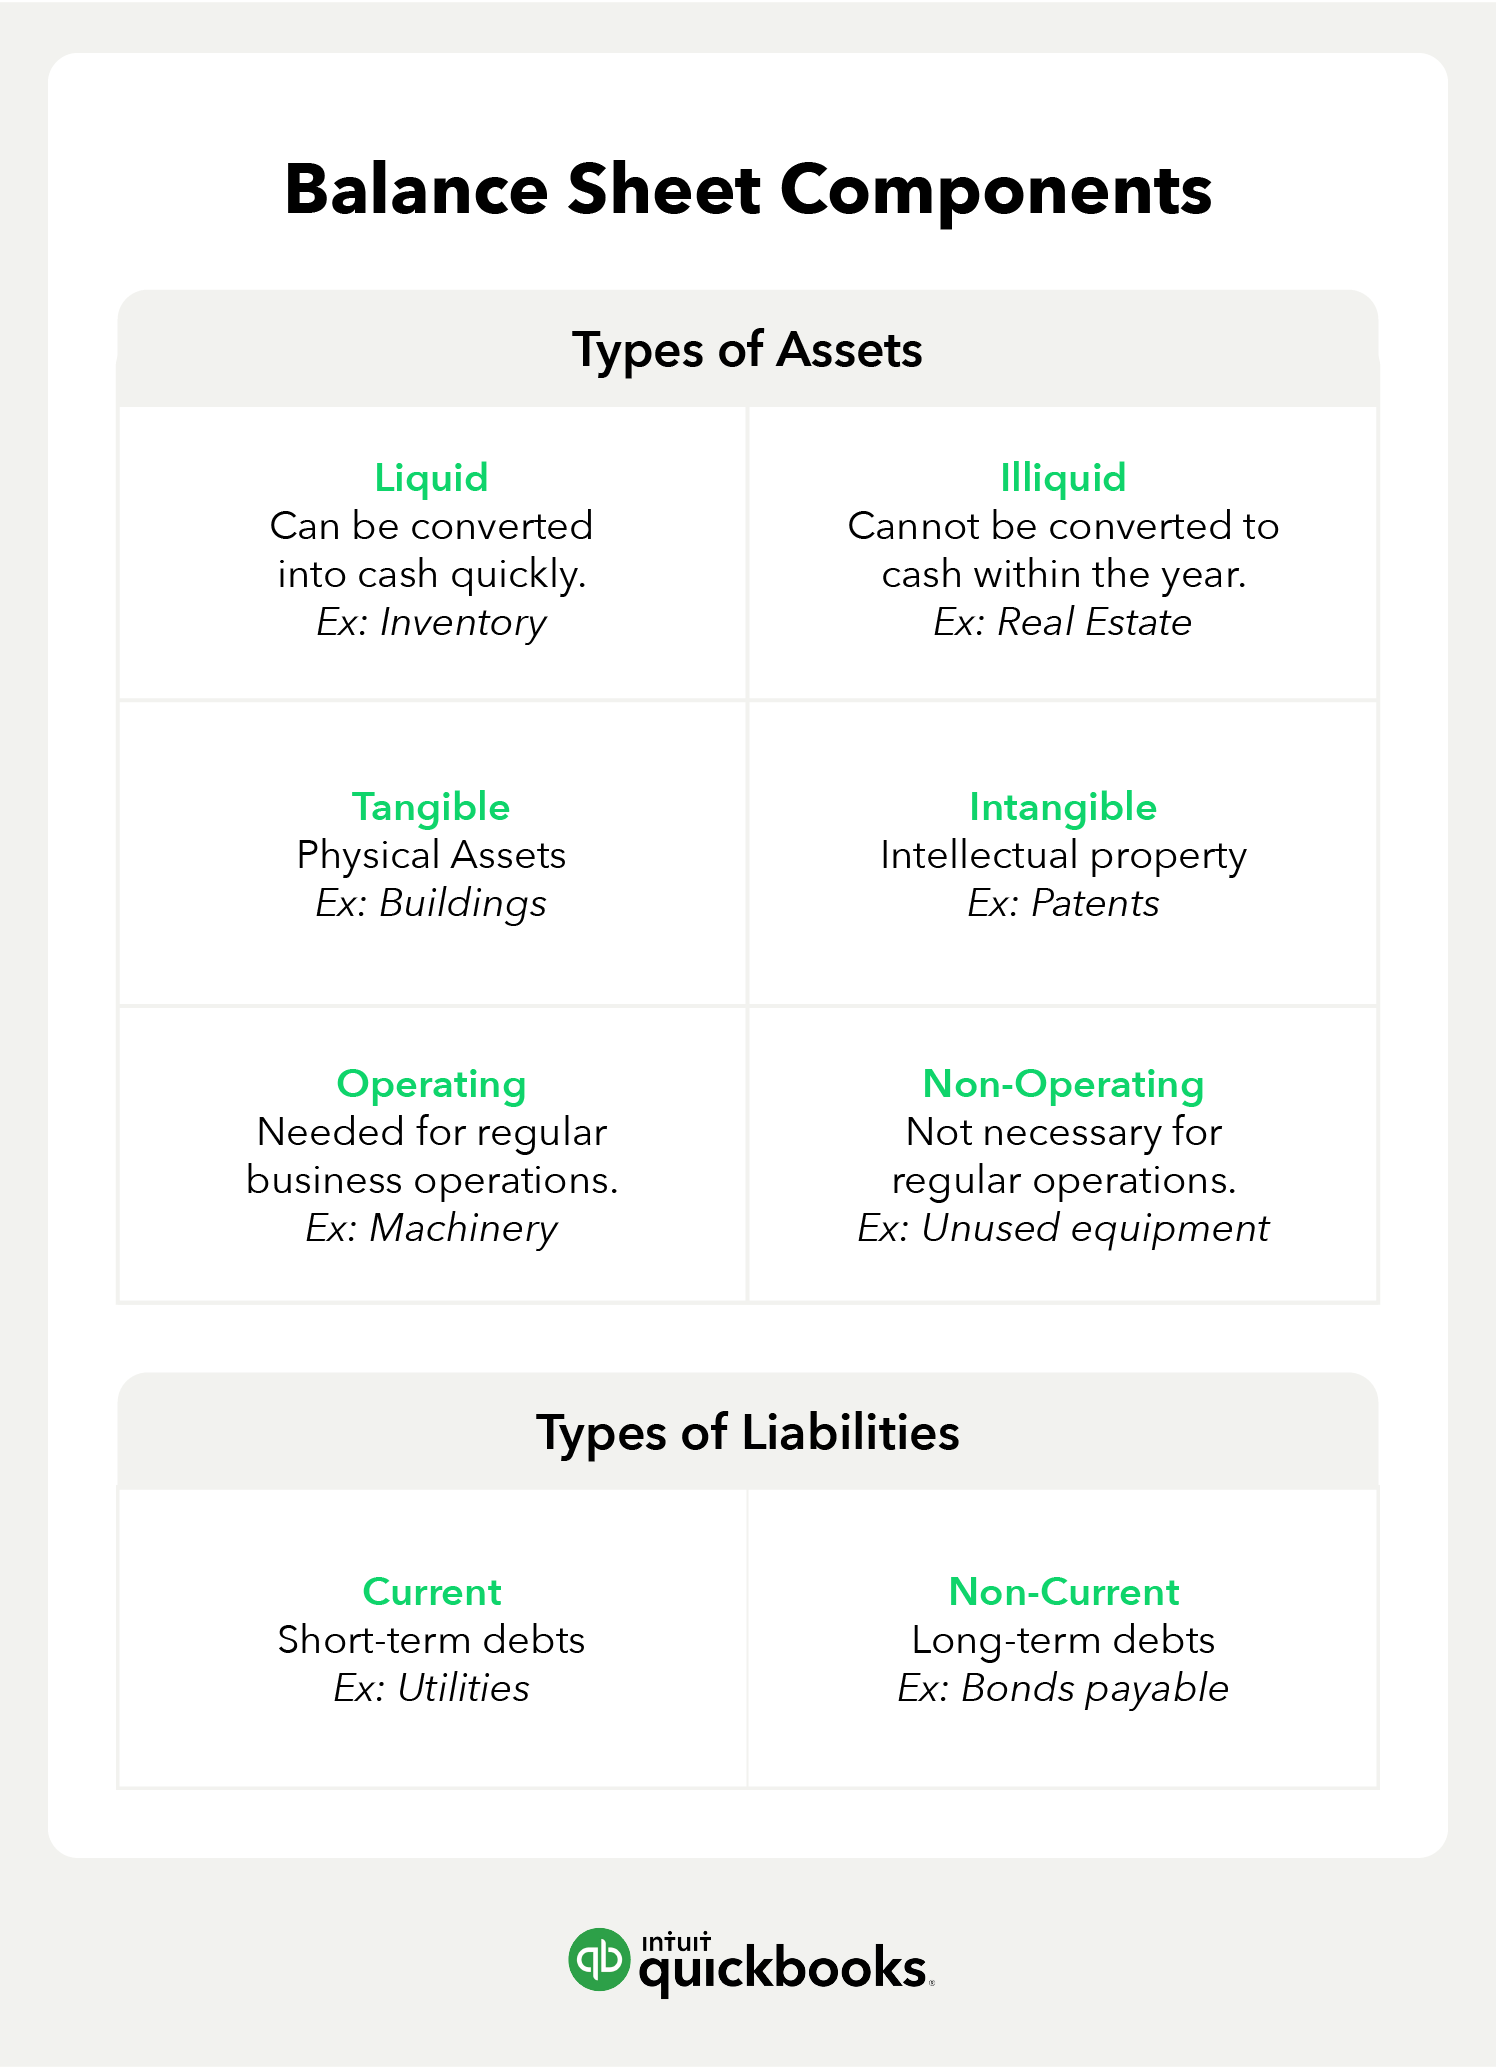 An infographic showing balance sheet components (types of assets and types of liabilities). Underneath types of assets are liquid, illiquid, tangible, intangible, operating, and non-operating. Underneath types of liabilities are current and non-current.